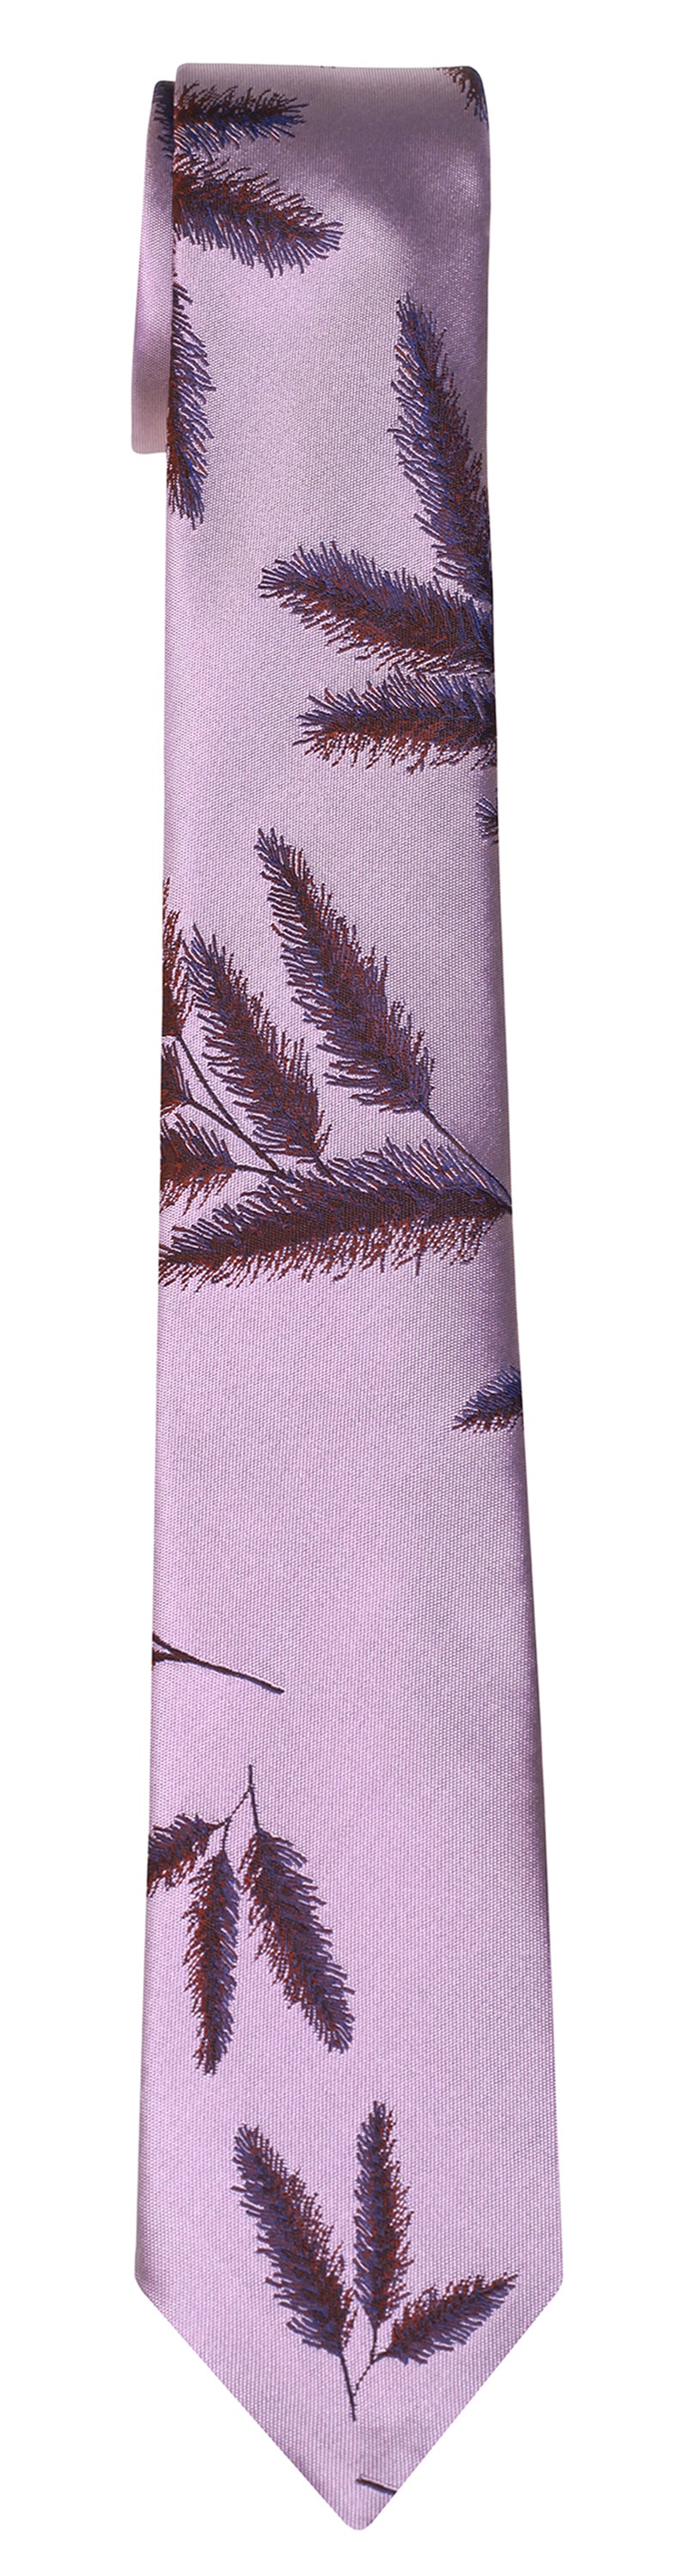 Mimi Fong Reeds Tie in Lilac